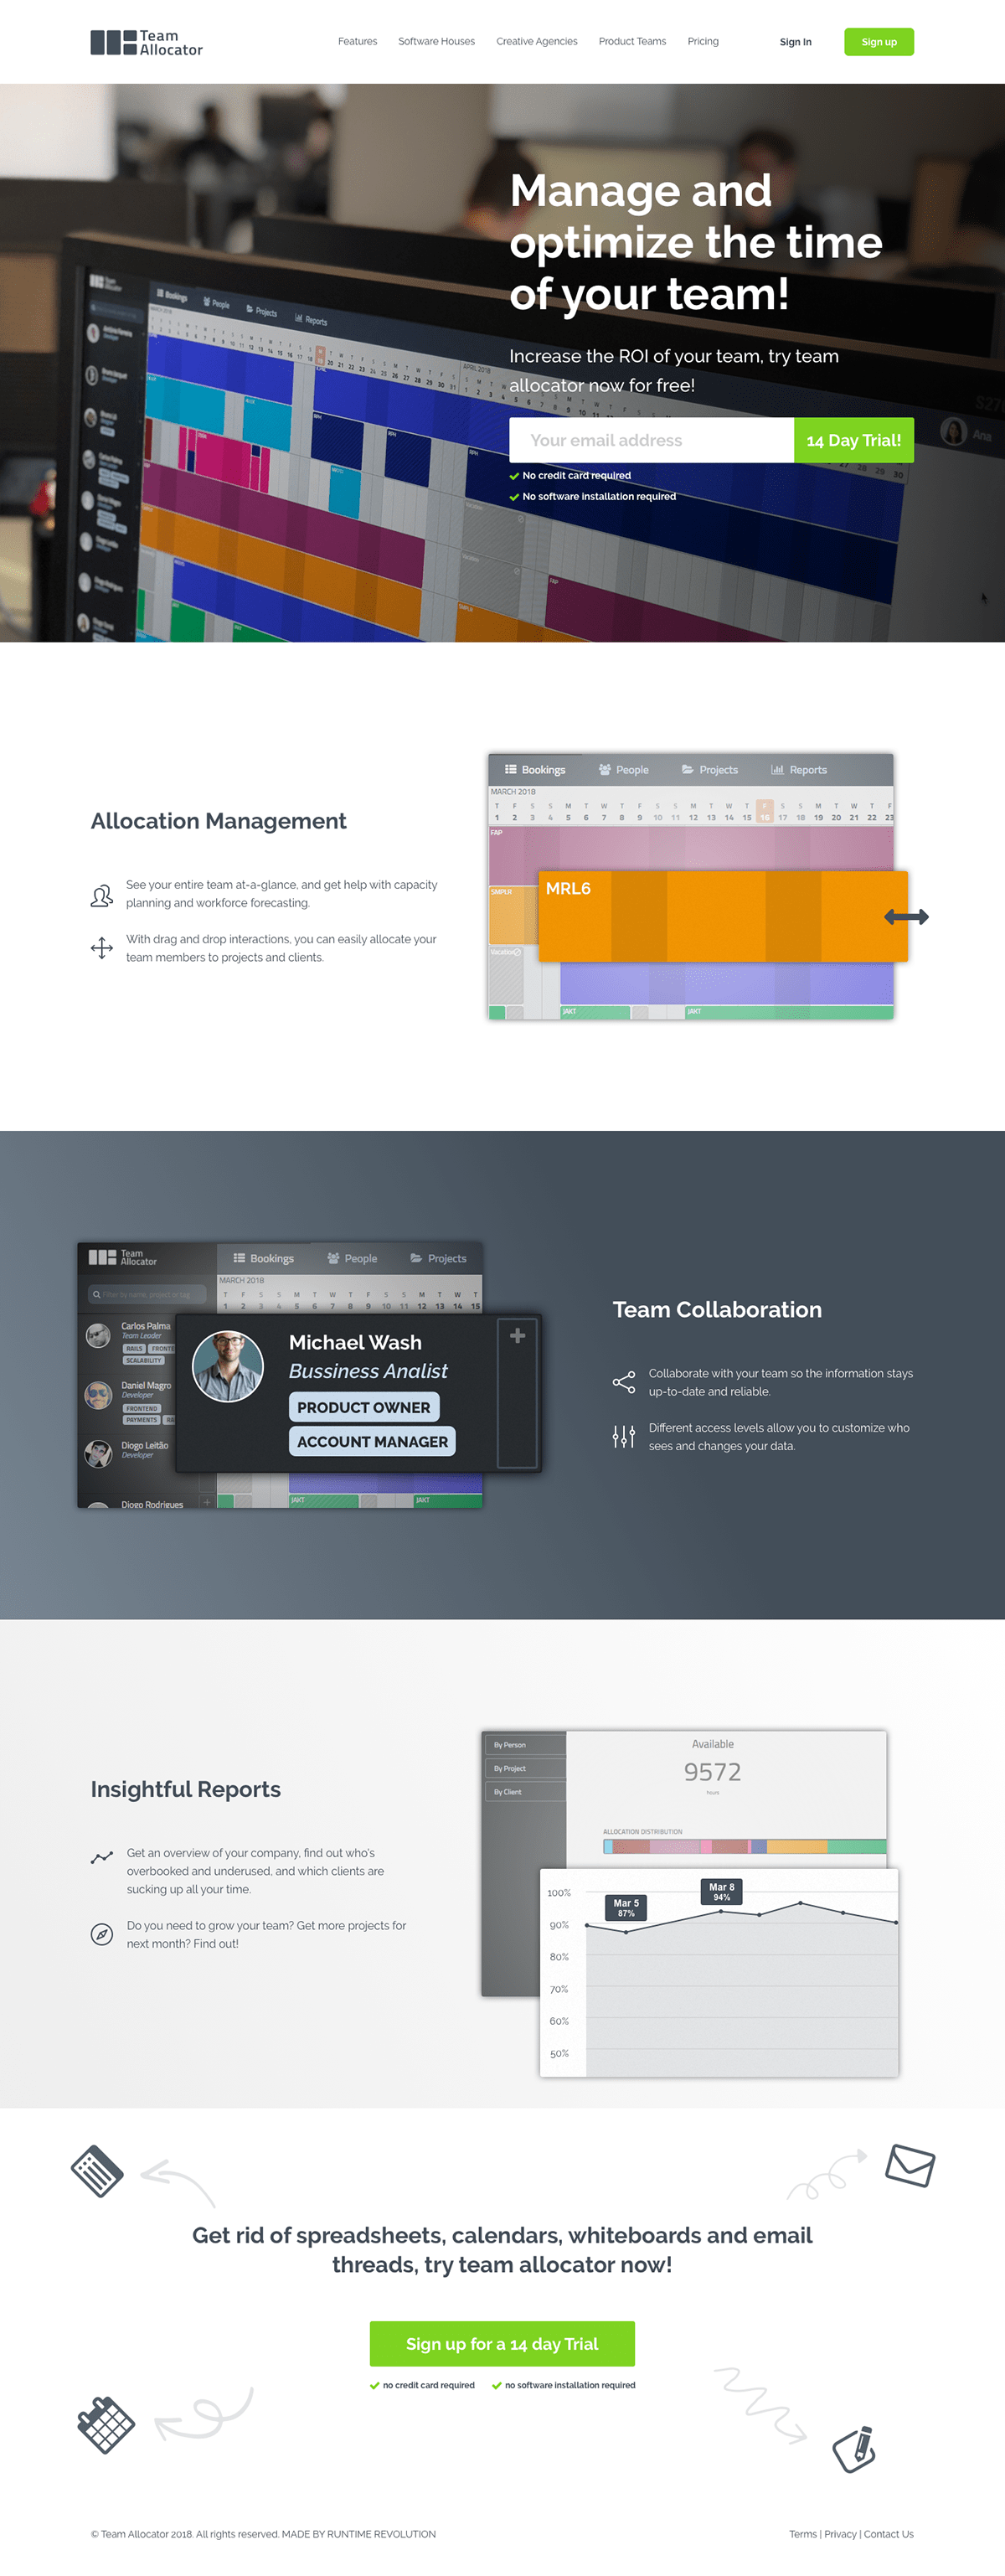 redesign clean Web Design  ux UI Imagery